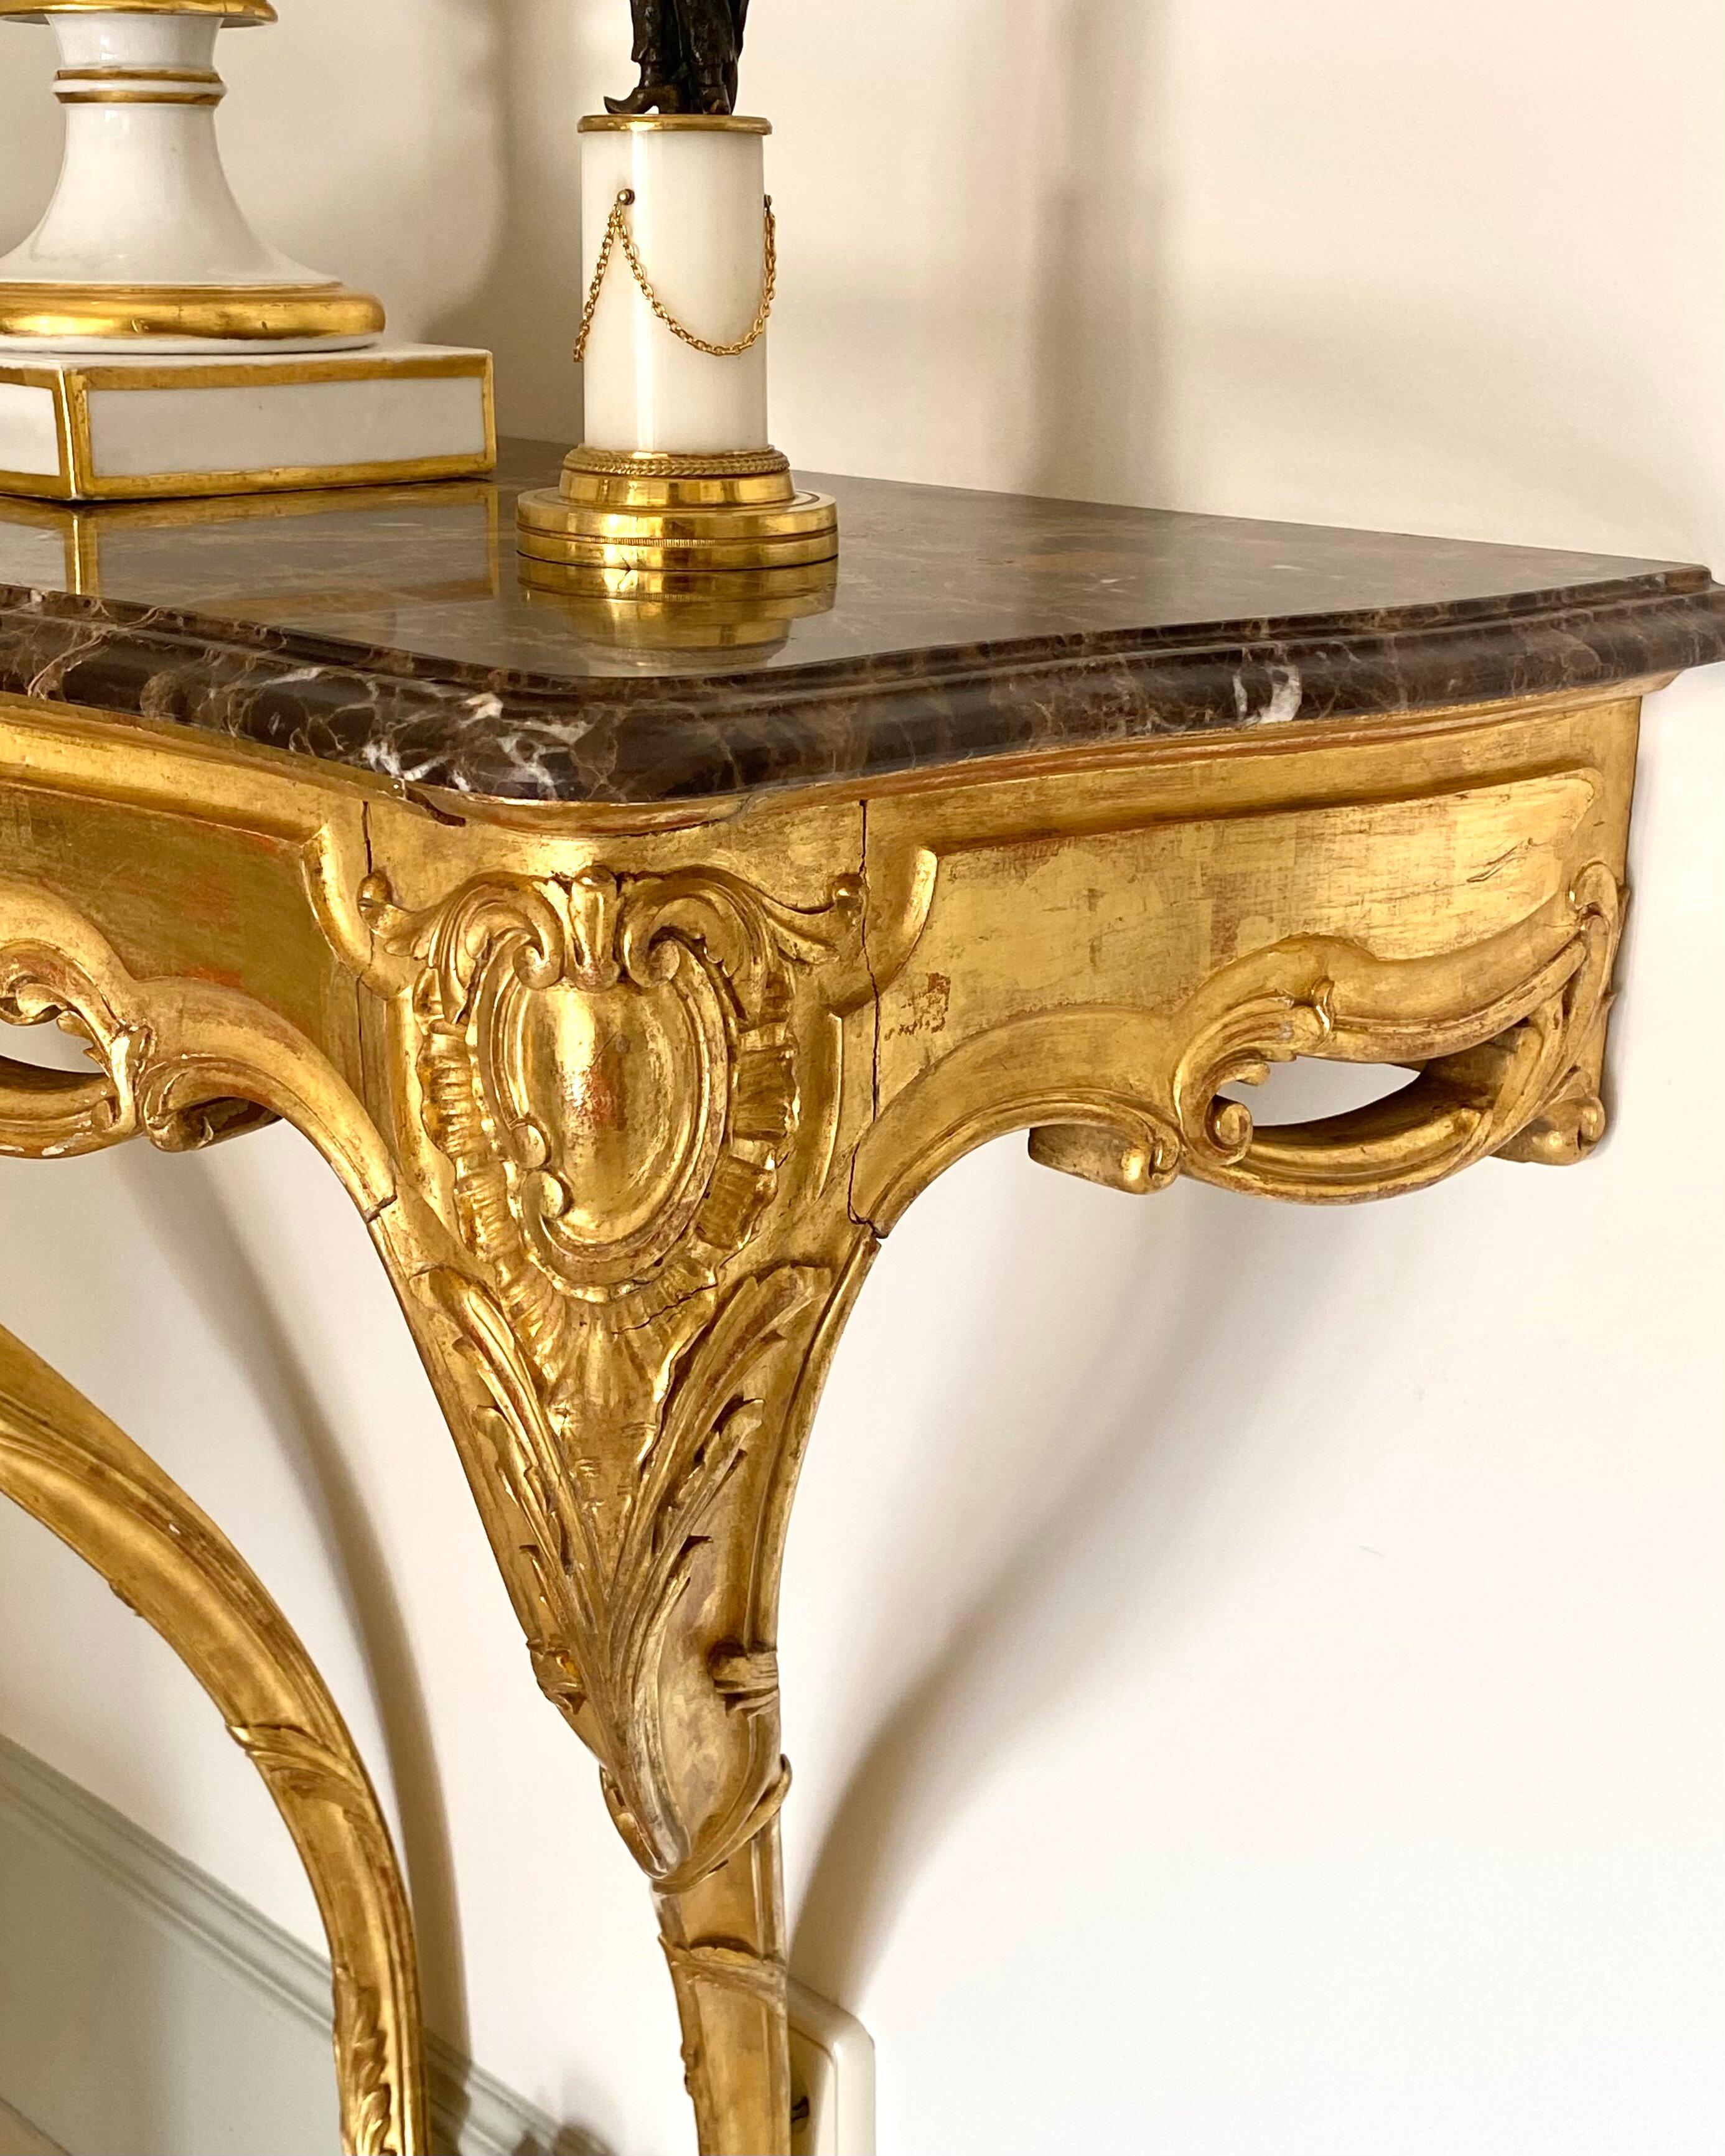 Pair of Spanish 19th century console tables in the Rococo - Louis XV style or Carlos III (king of Spain between 1759 and 1788) style.
Made of hand-carved gilded wood with traditional rococo decoration of garlands of flowers and foliage as well as